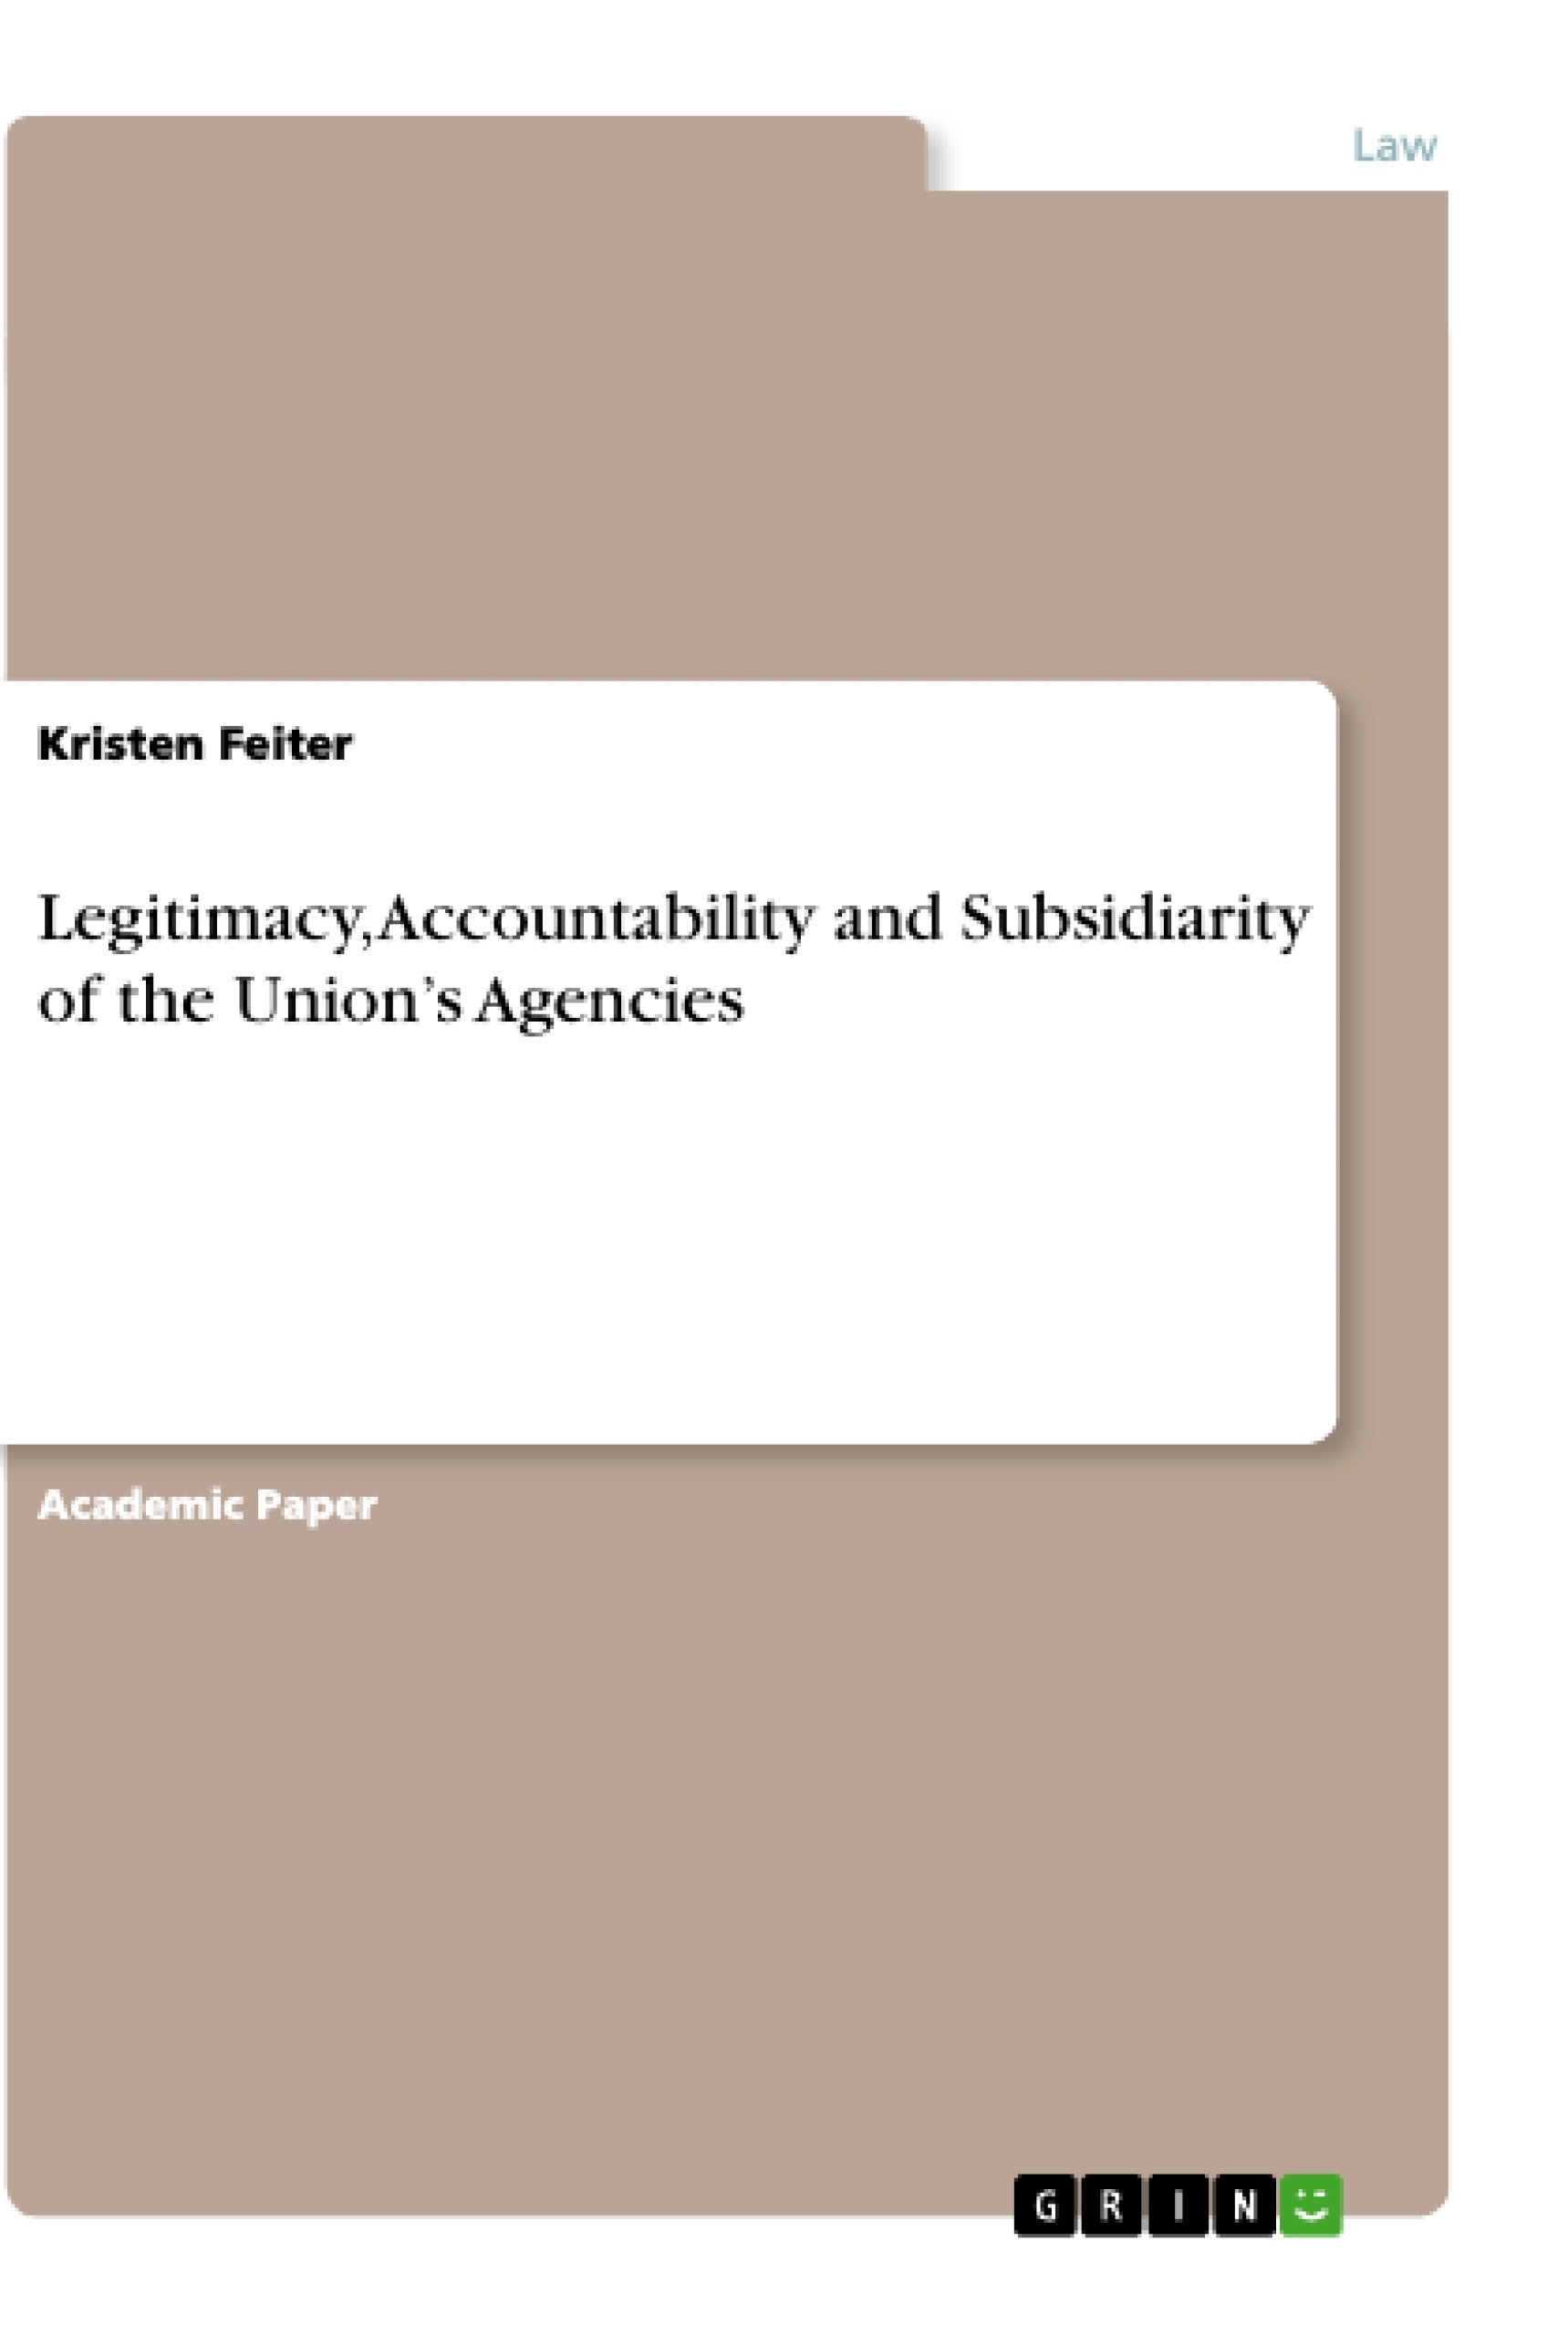 Title: Legitimacy, Accountability and Subsidiarity of the Union’s Agencies